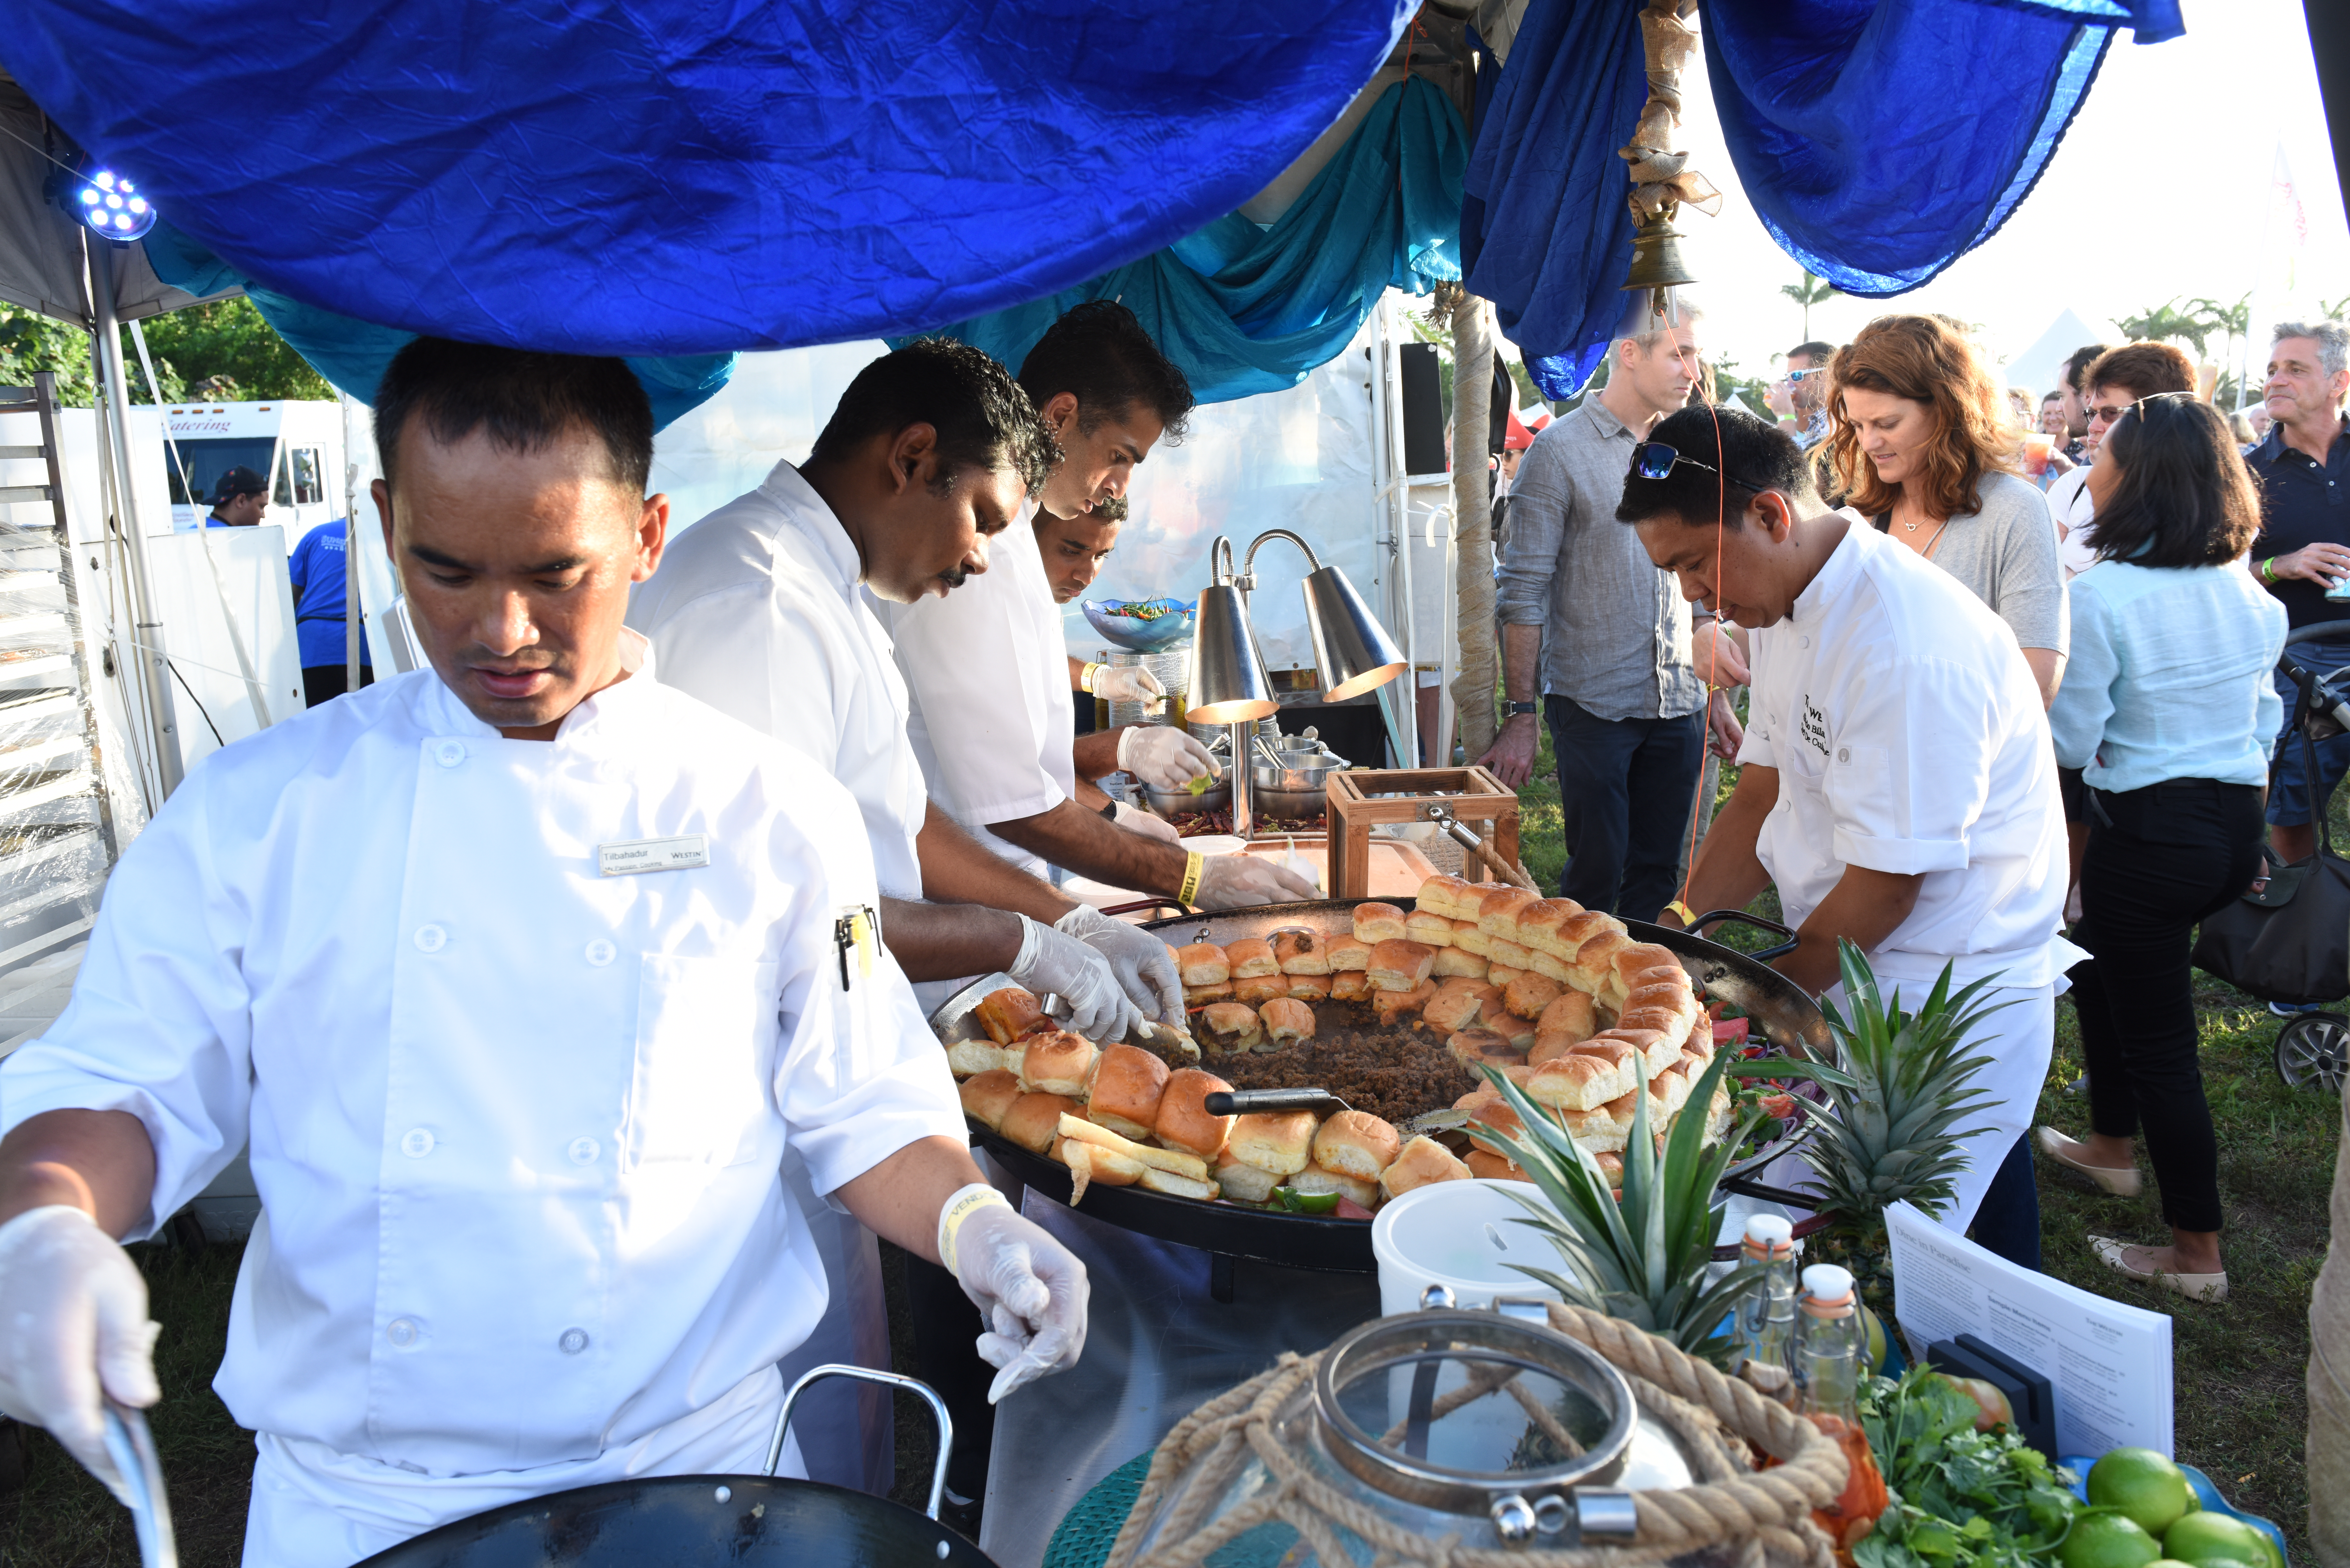 chefs serving food to customers at food festival